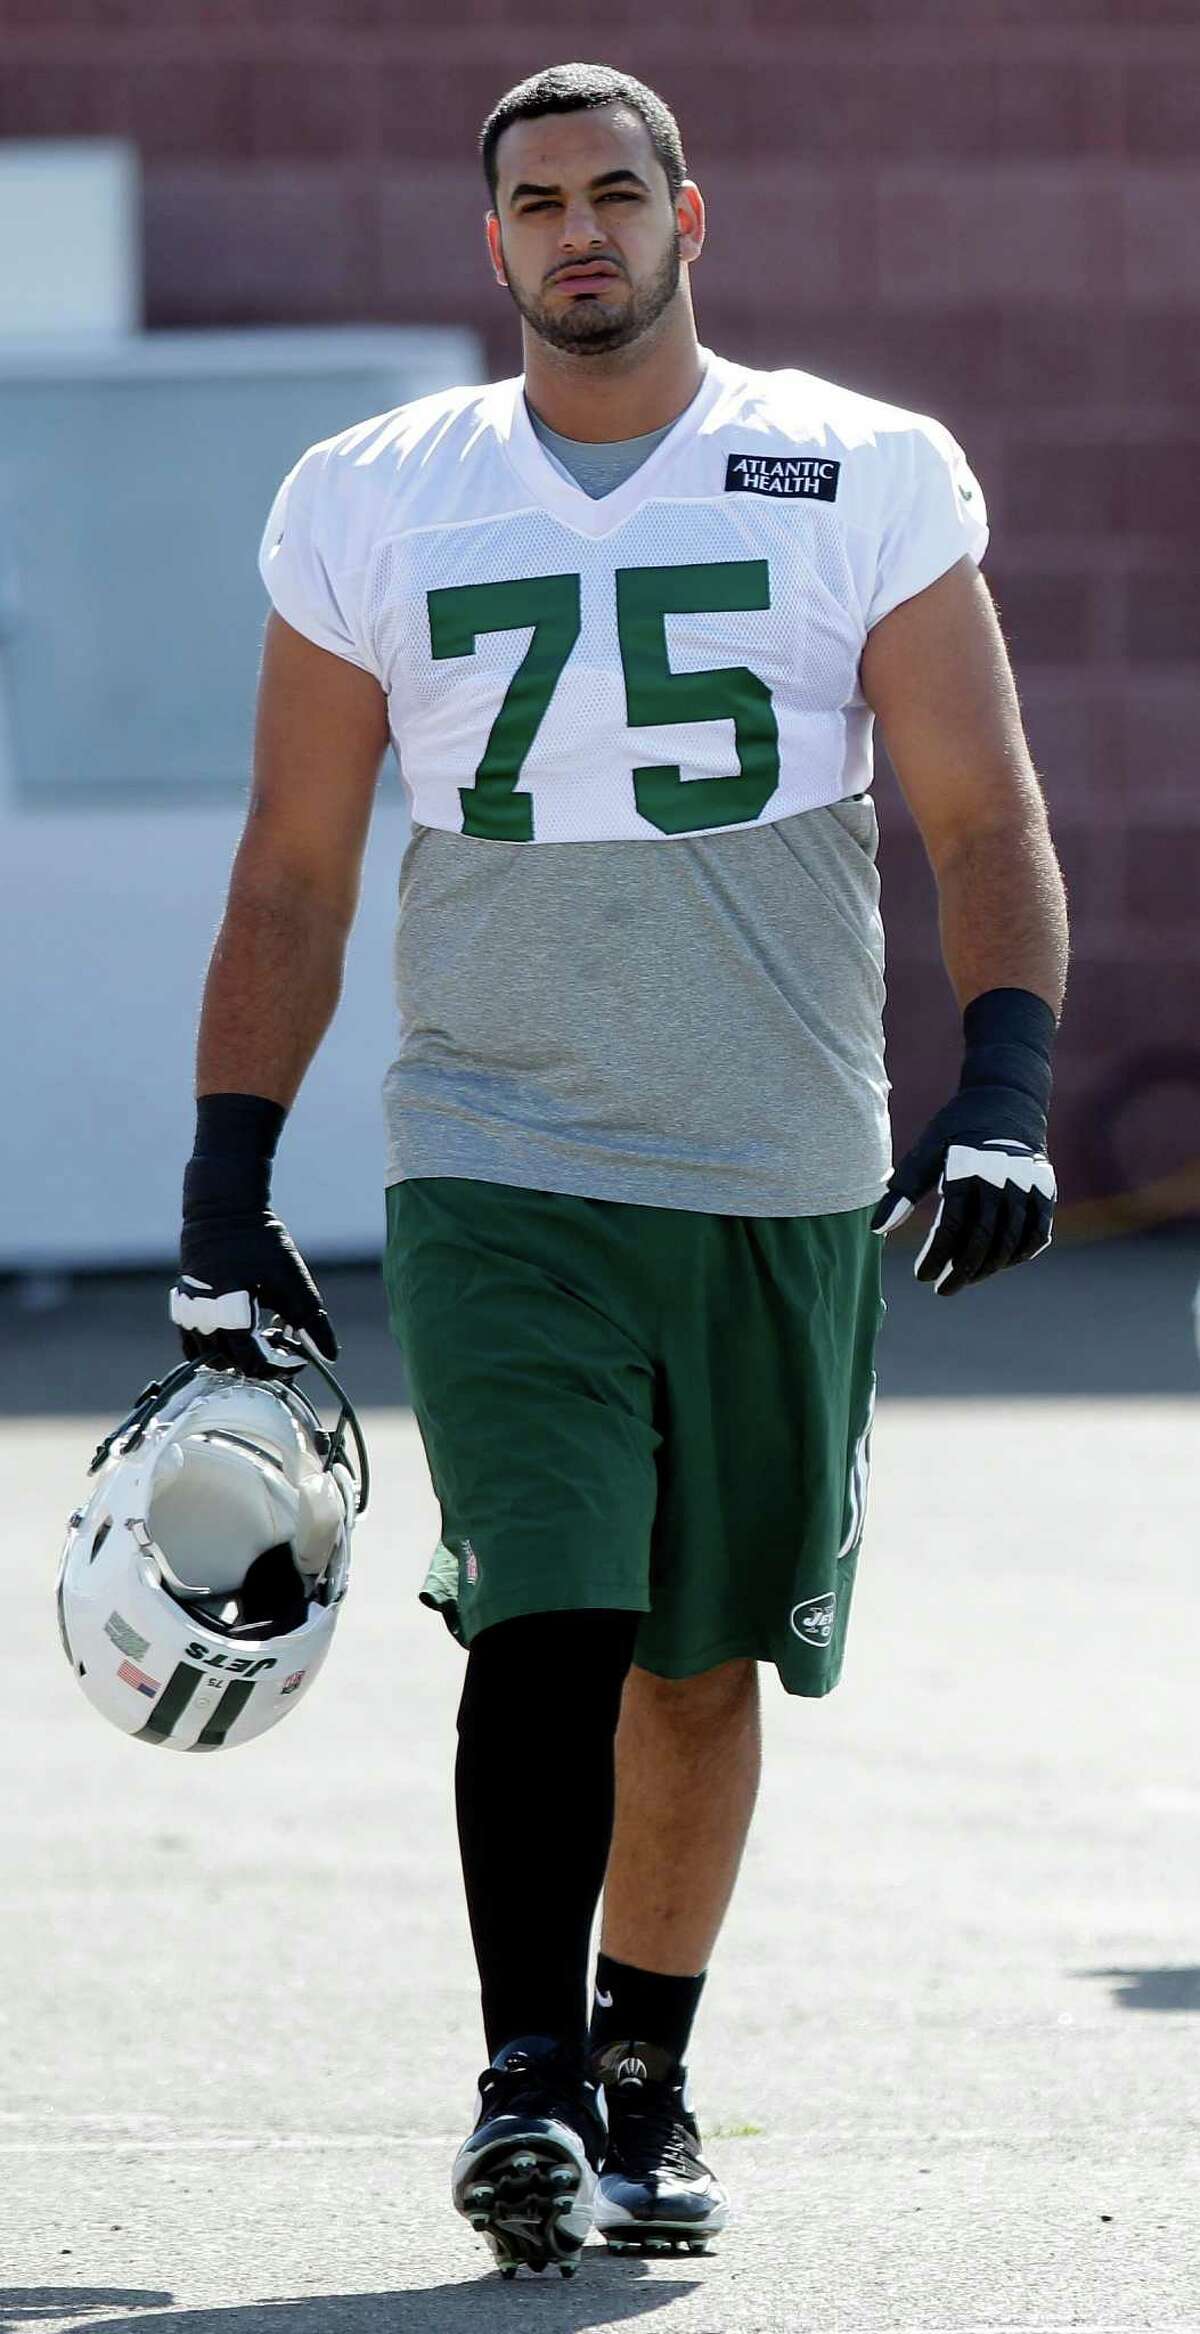 In this Thursday, July 24, 2014 file photo, New York Jets offensive tackle Oday Aboushi (75) walks to practice at Jets NFL football training camp in Cortland, N.Y. Aboushi was part of a five-day surgical mission by the Islamic Medical Association of North America in early March to repair cleft lips Sudan. (AP Photo)